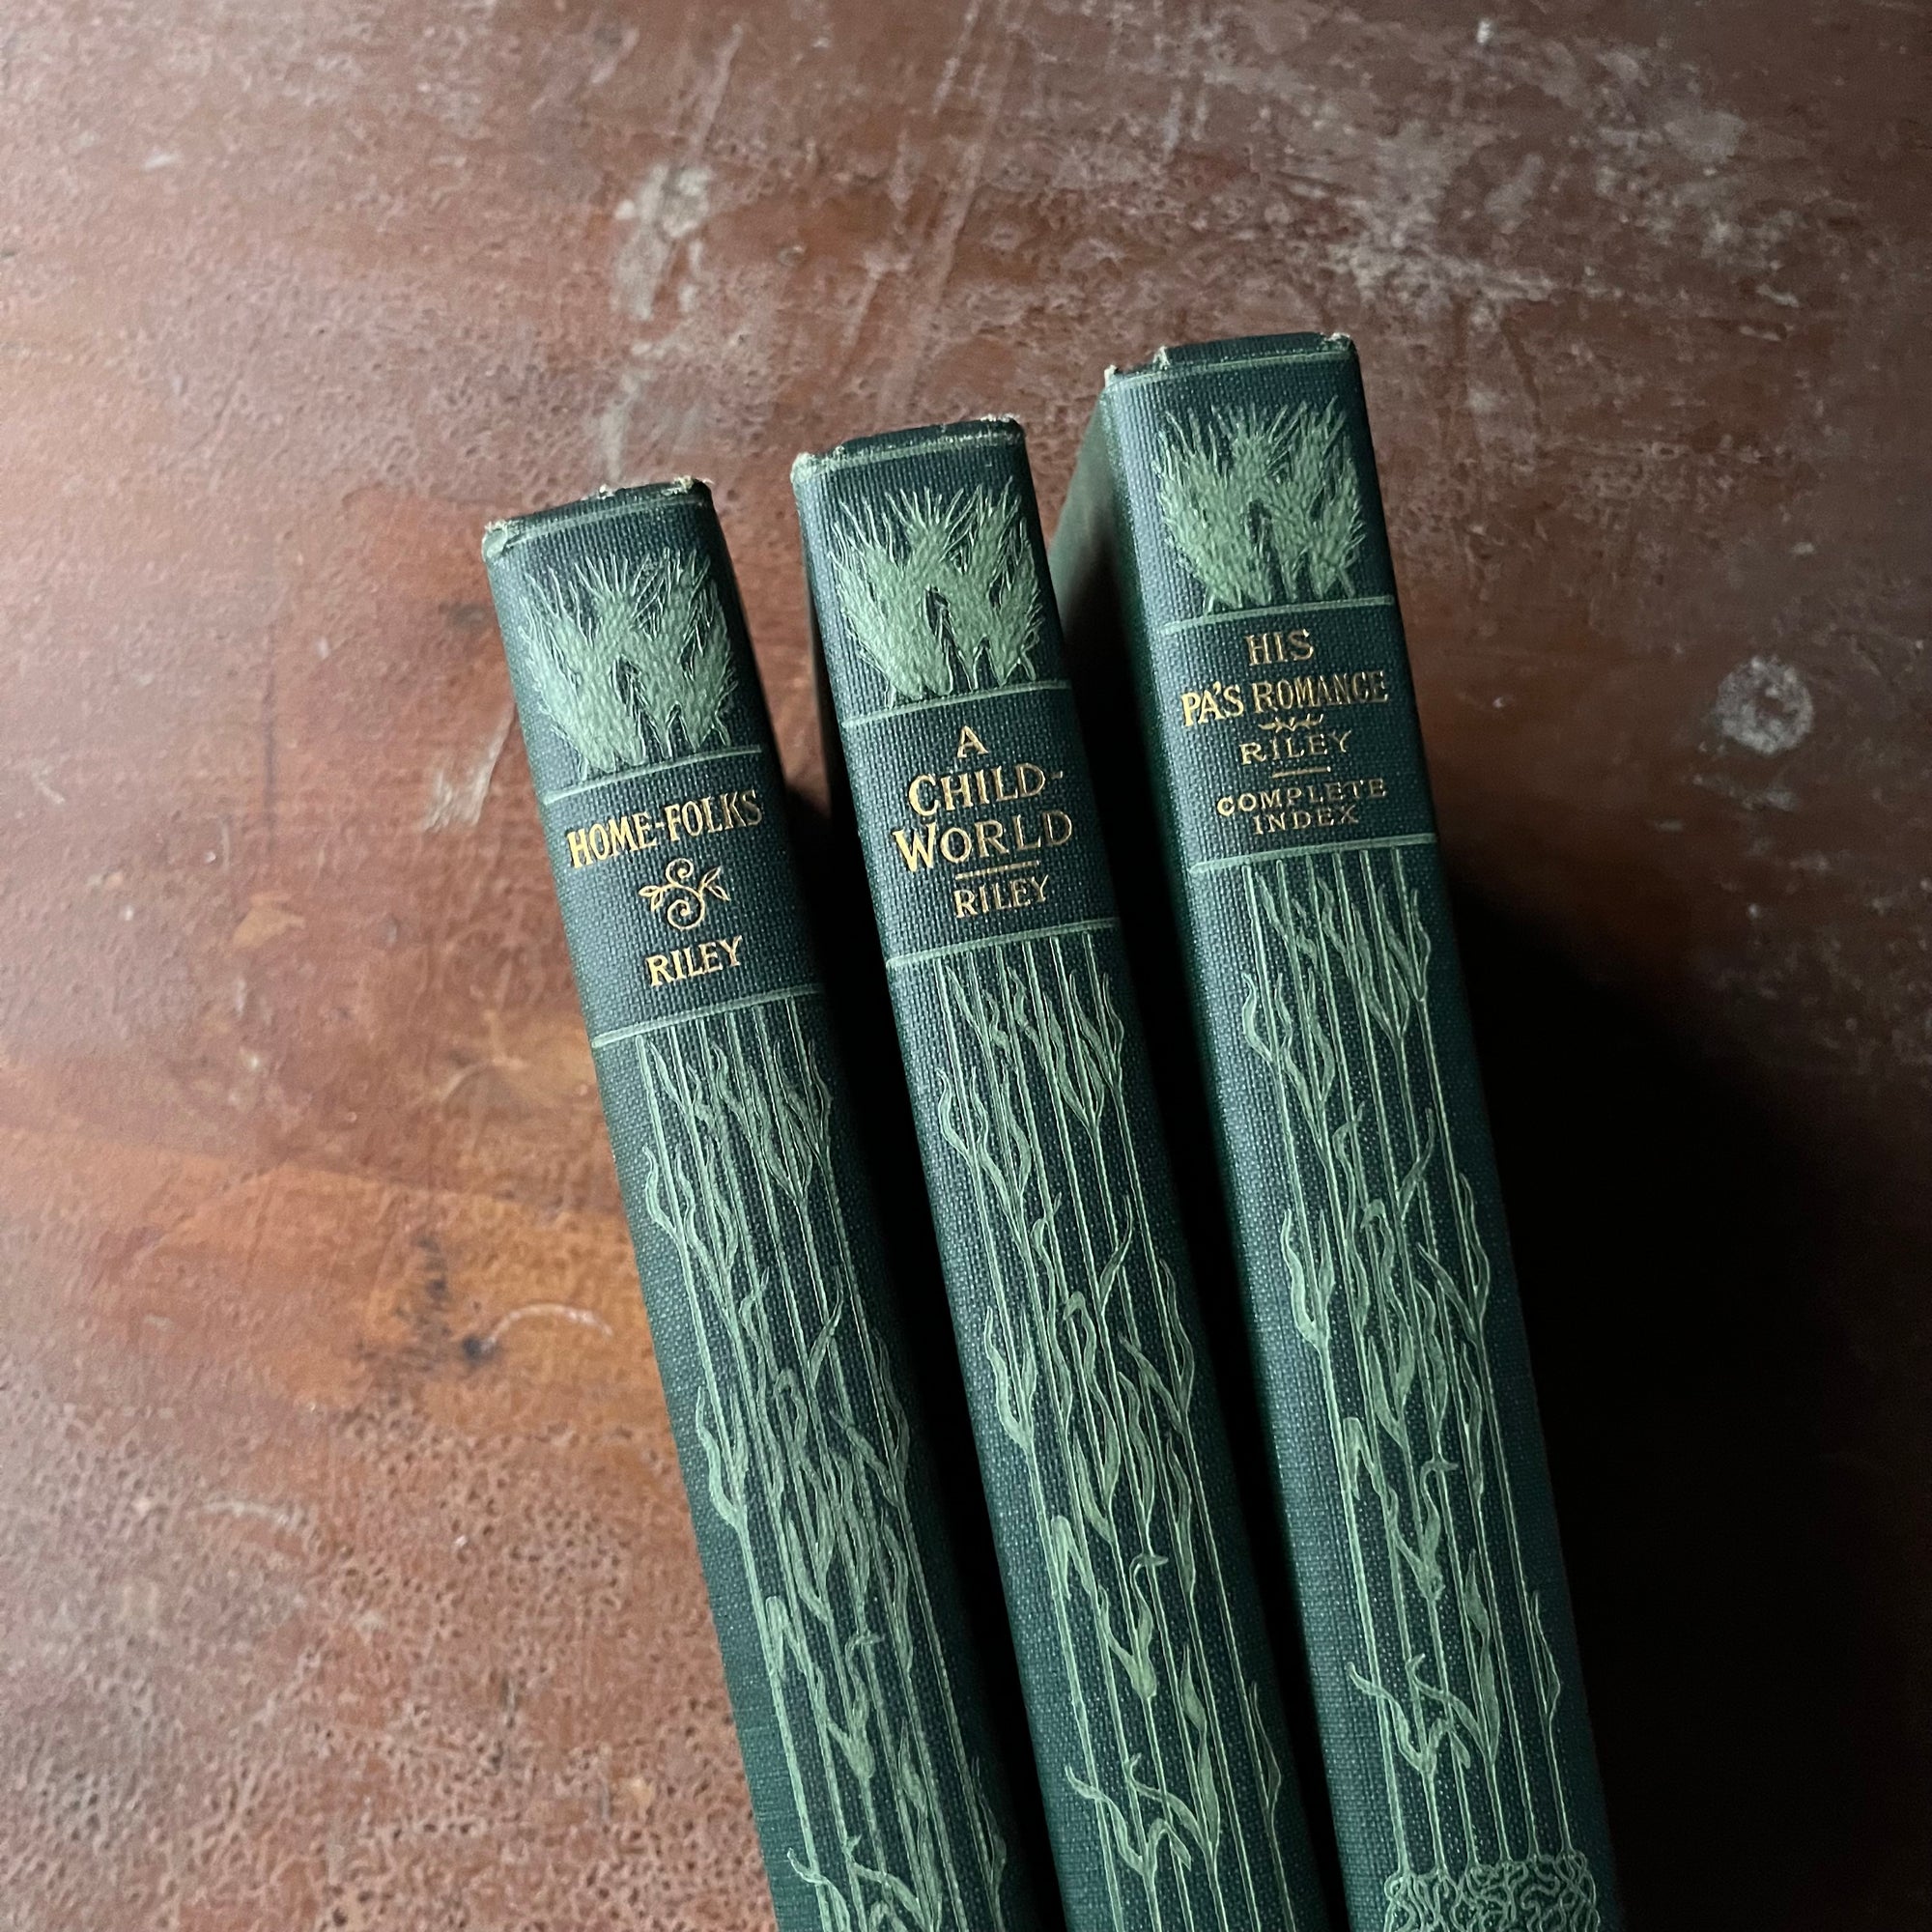 Set of Three James Whitcomb Riley Books-Home-Folks, A Child's World, and His Pa's Romance with Complete Index-antique poetry books-view of the embossed spines with an art deco design & titles